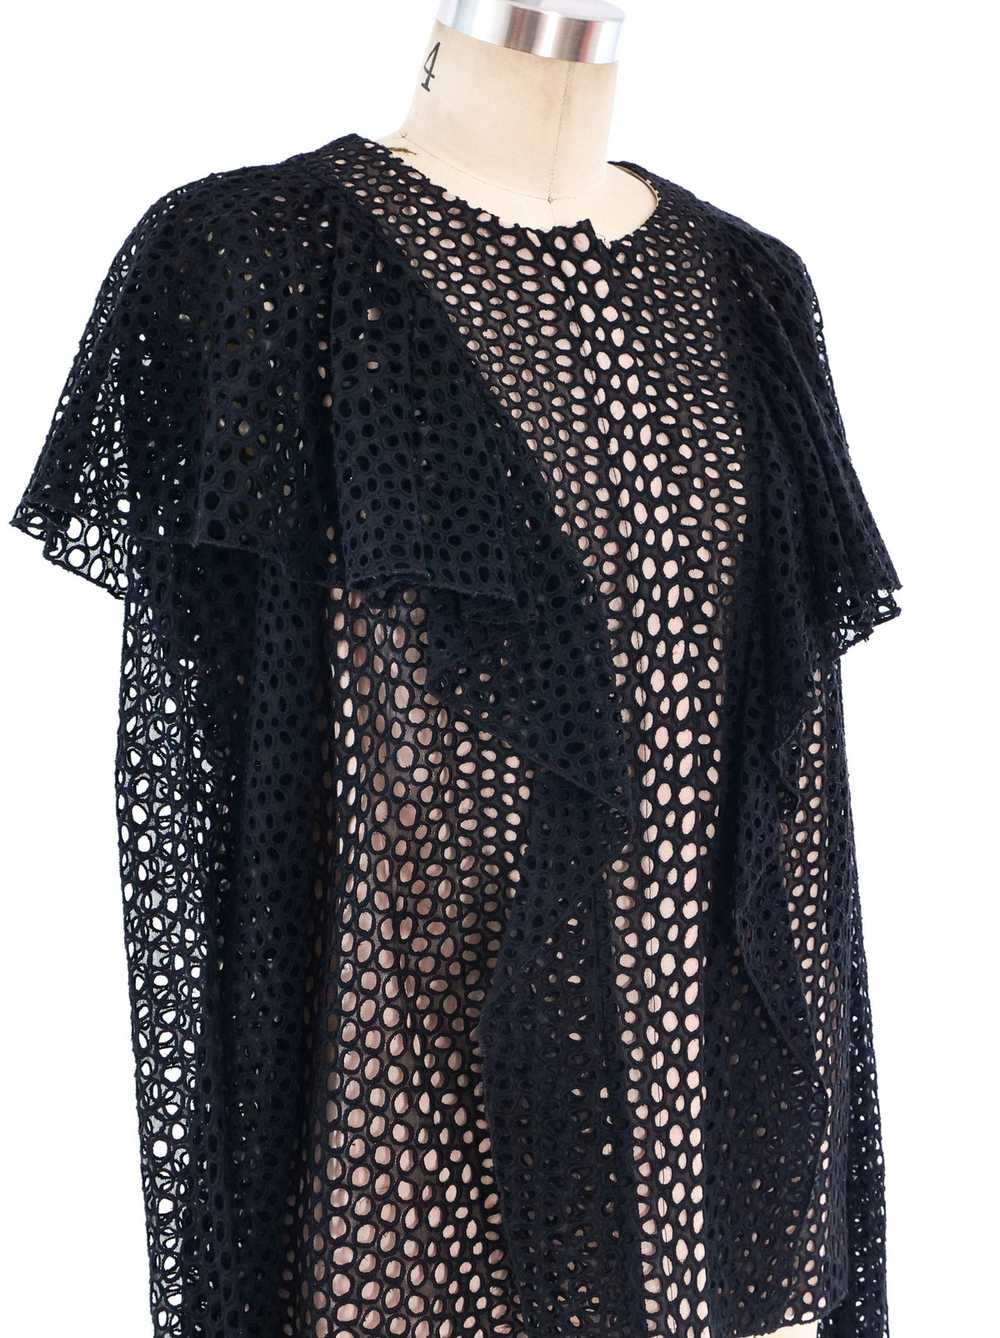 Lanvin Eyelet Button Front Top - image 4